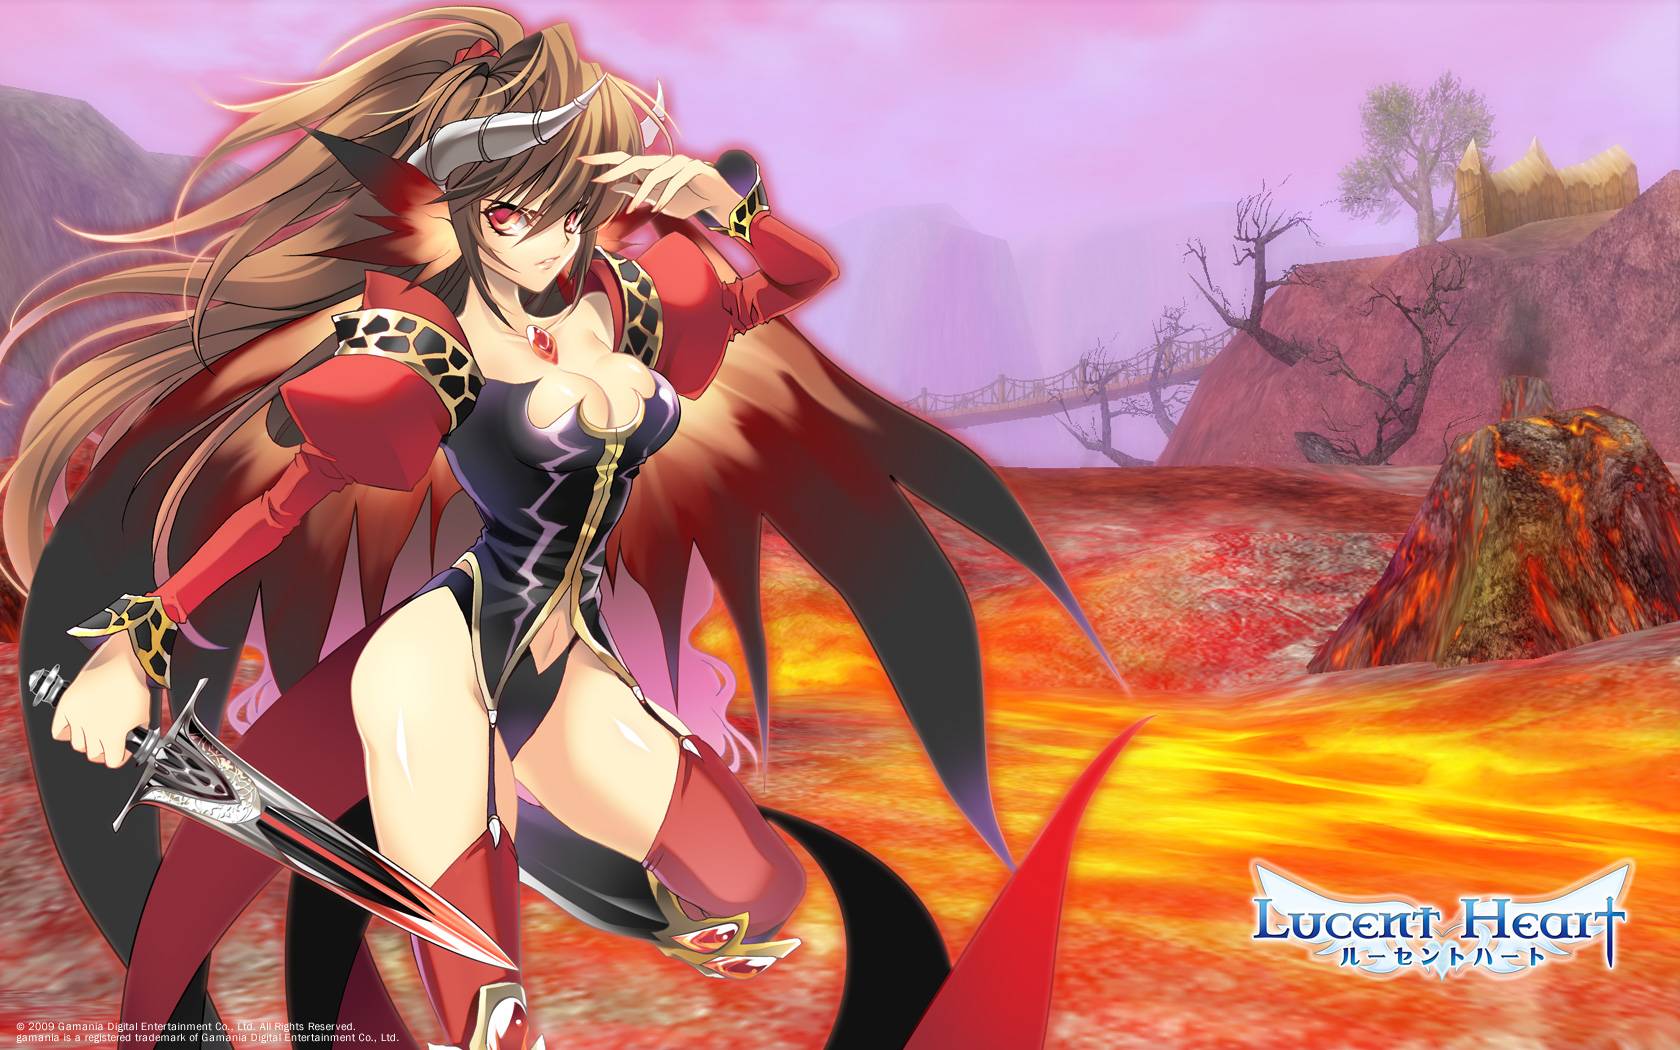 Lucent Heart Wallpapers Images, Photos, Reviews